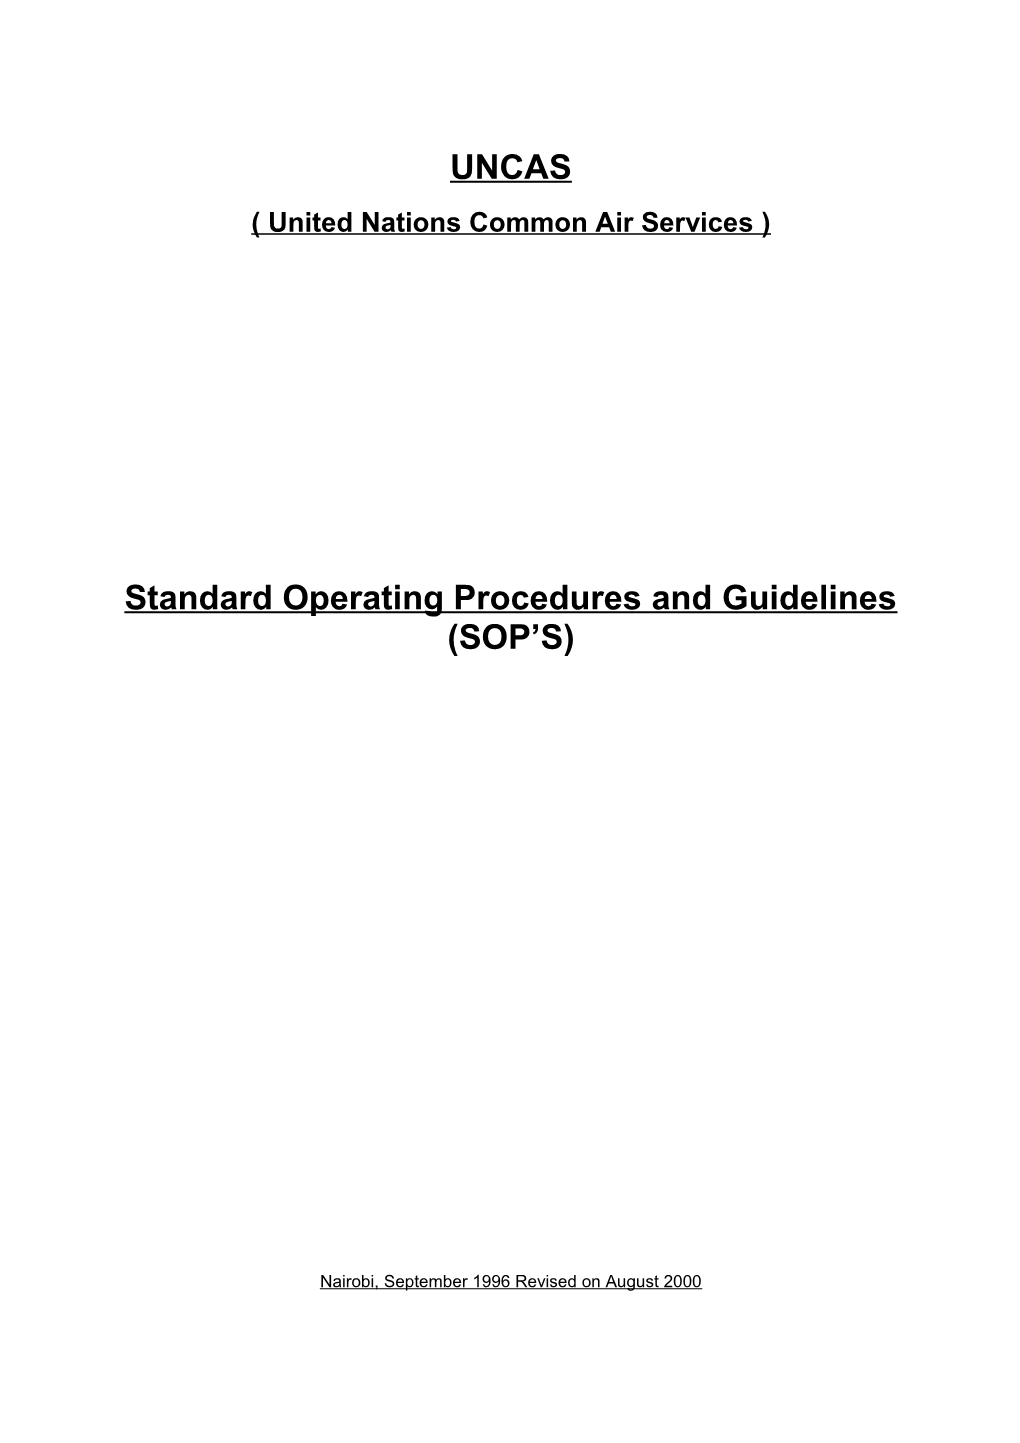 Operating Guidelines - United Nations Common Air Services (UNCAS)